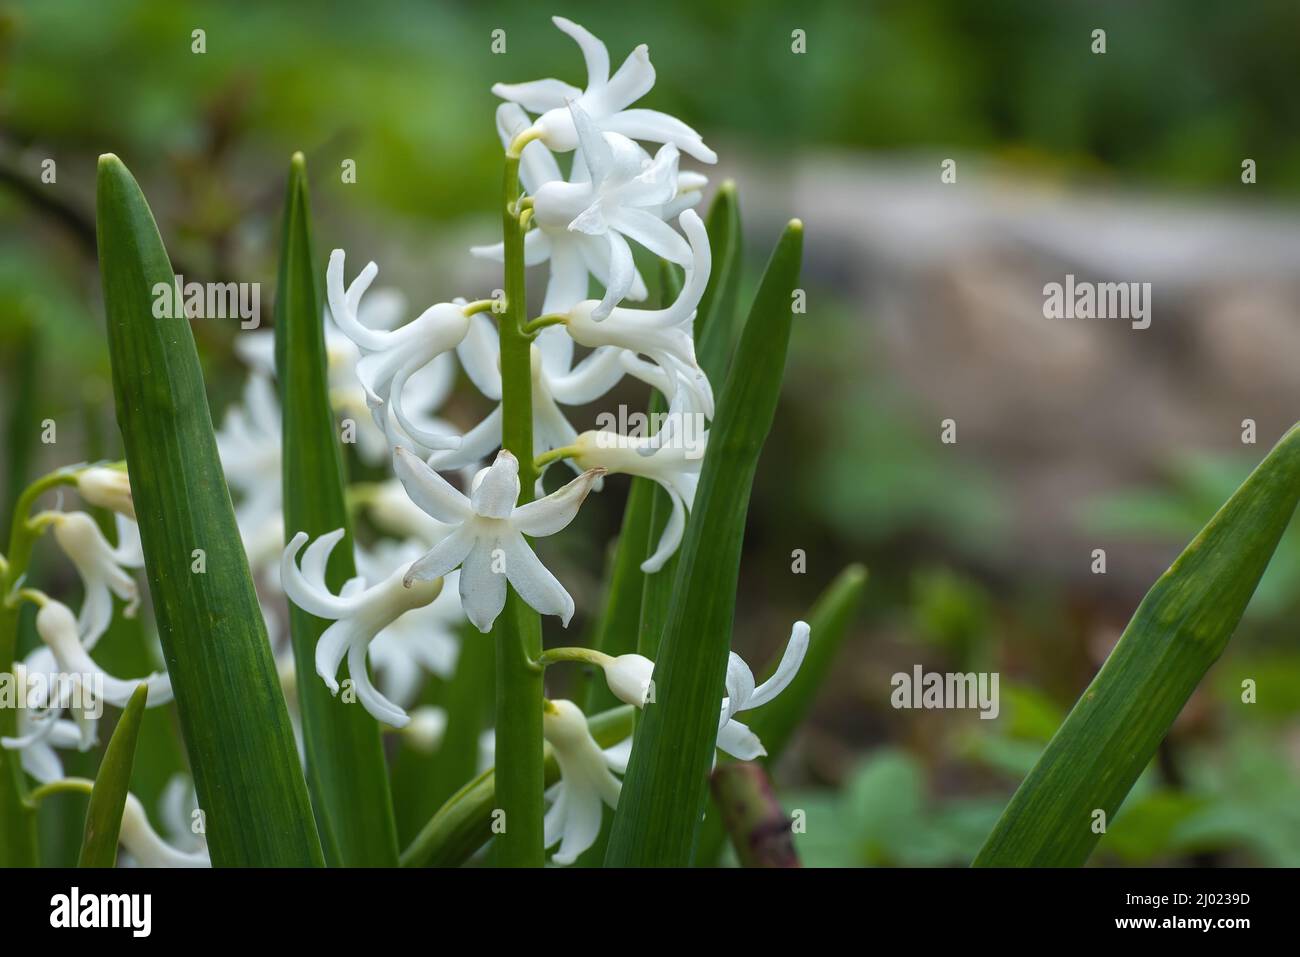 Beautiful white hyacinth (Hyacinthus) flower with green leaves on a flowerbed in the garden in spring Stock Photo